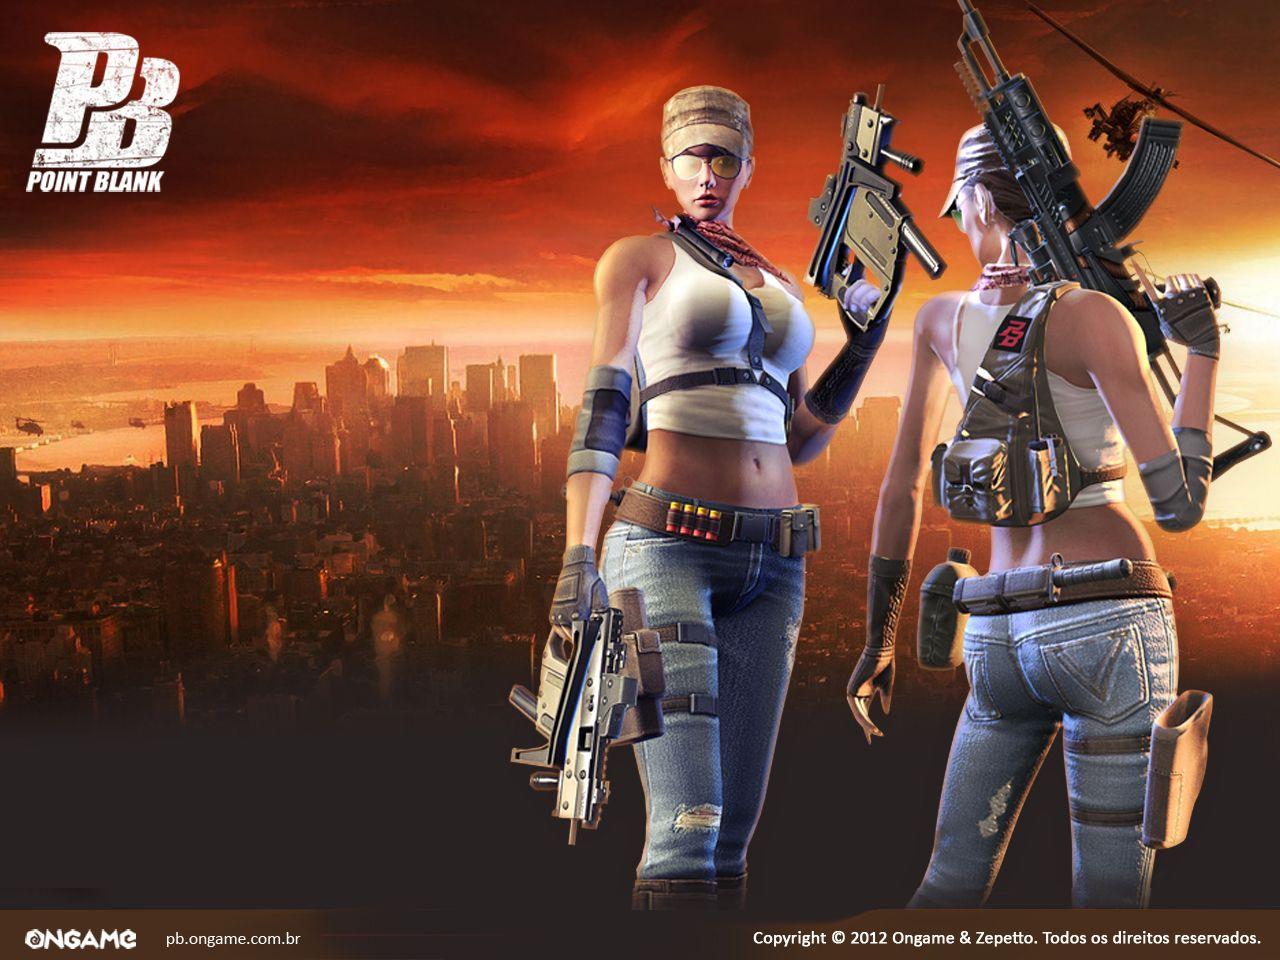 Download Wallpaper Point Blank. FPS. Ongame Jogos Online